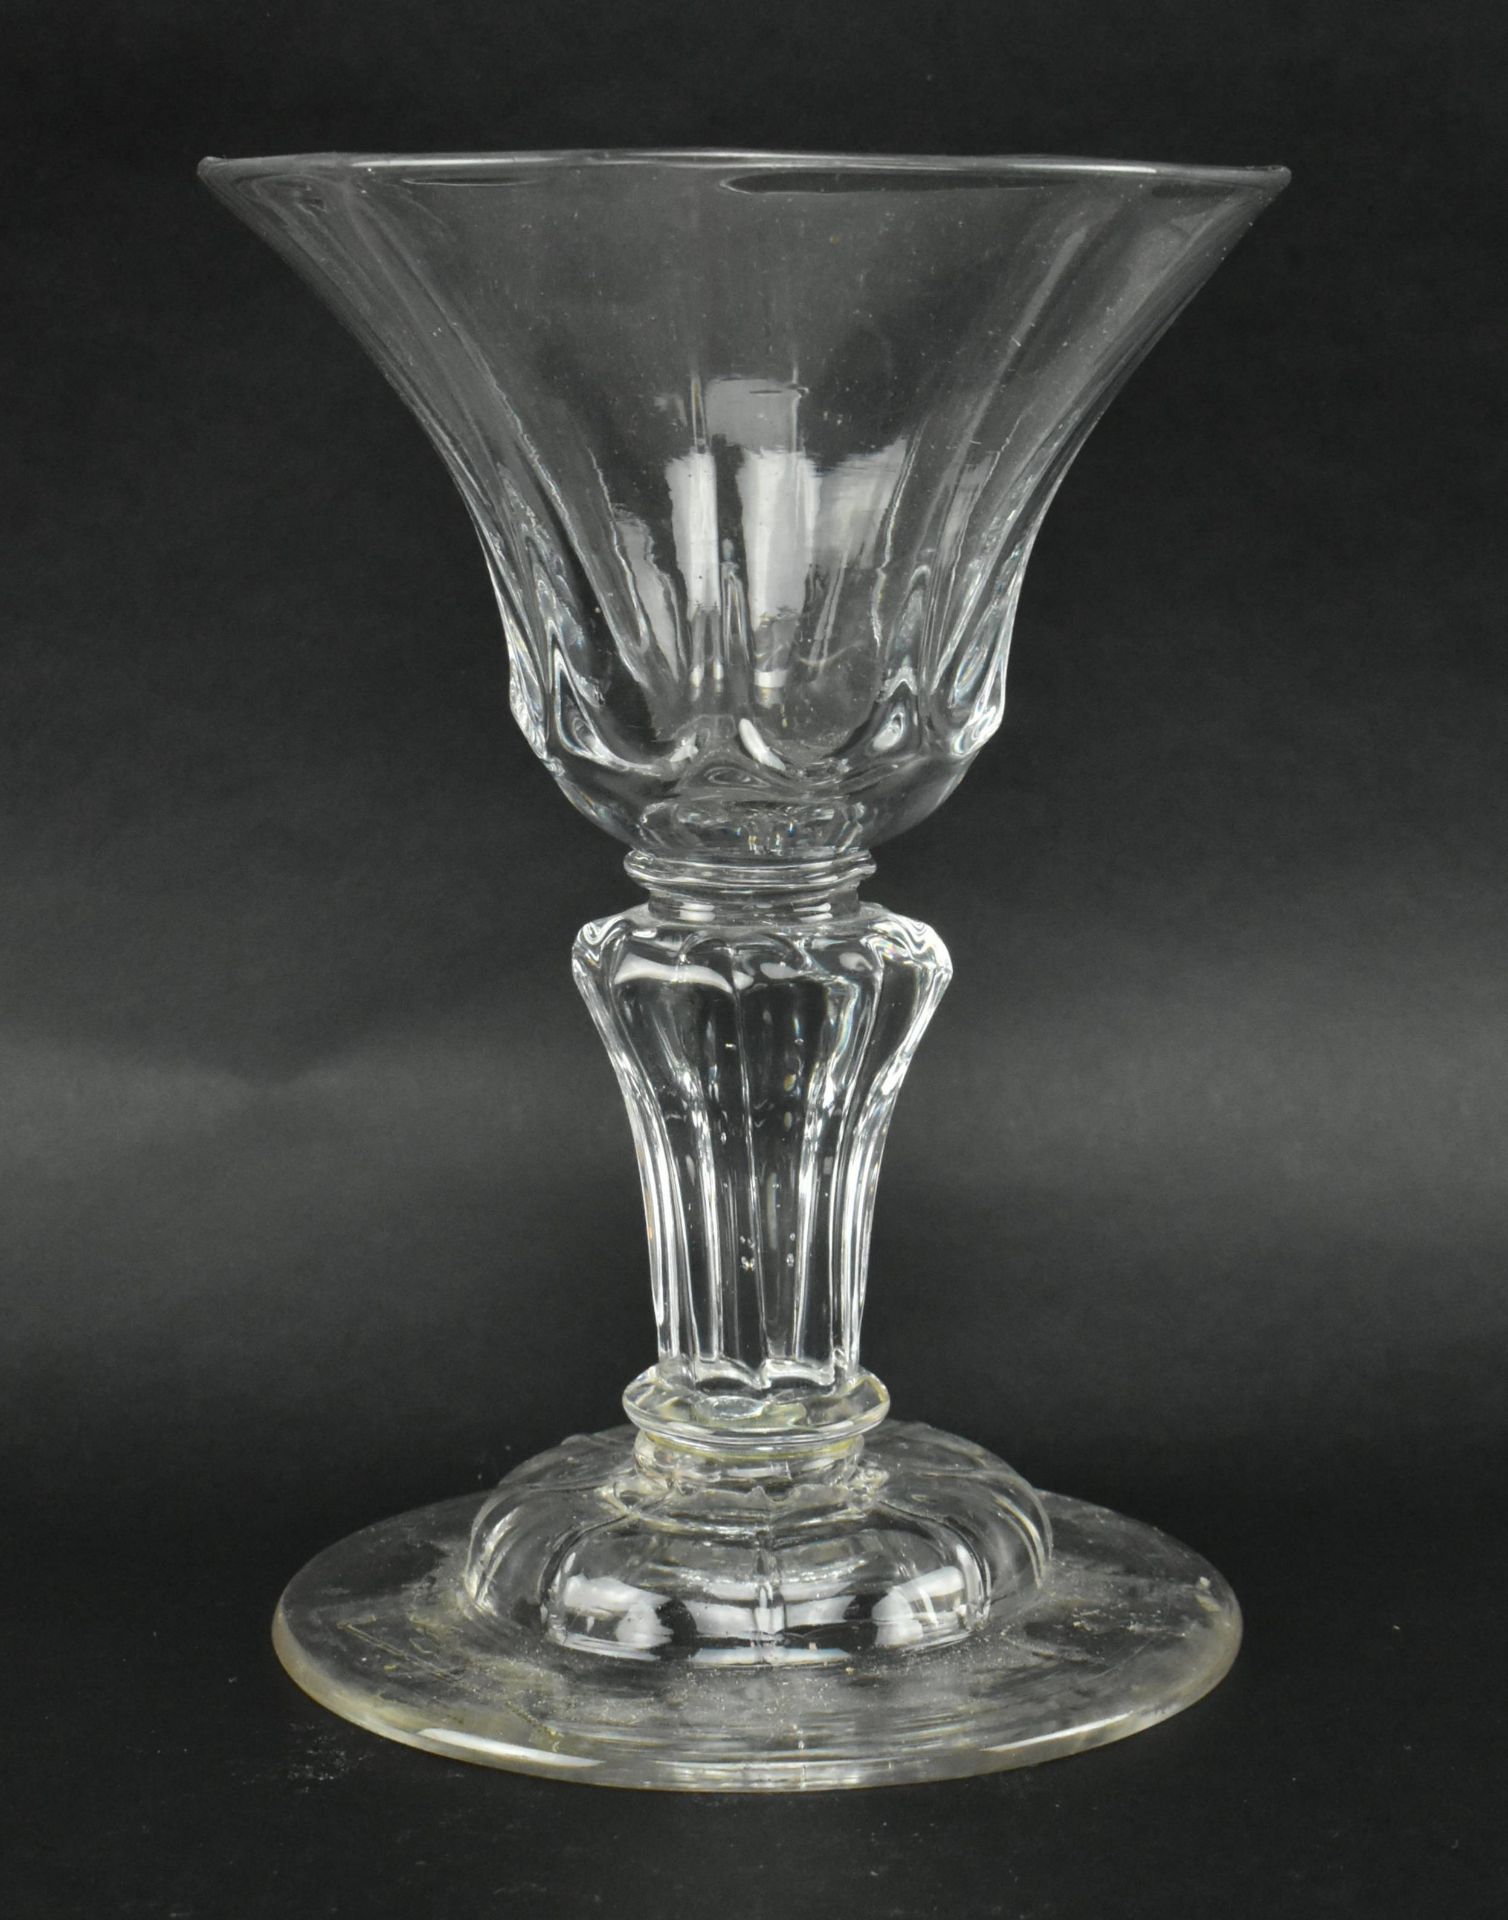 MID 18TH CENTURY MOULDED GLASS SWEETMEAT